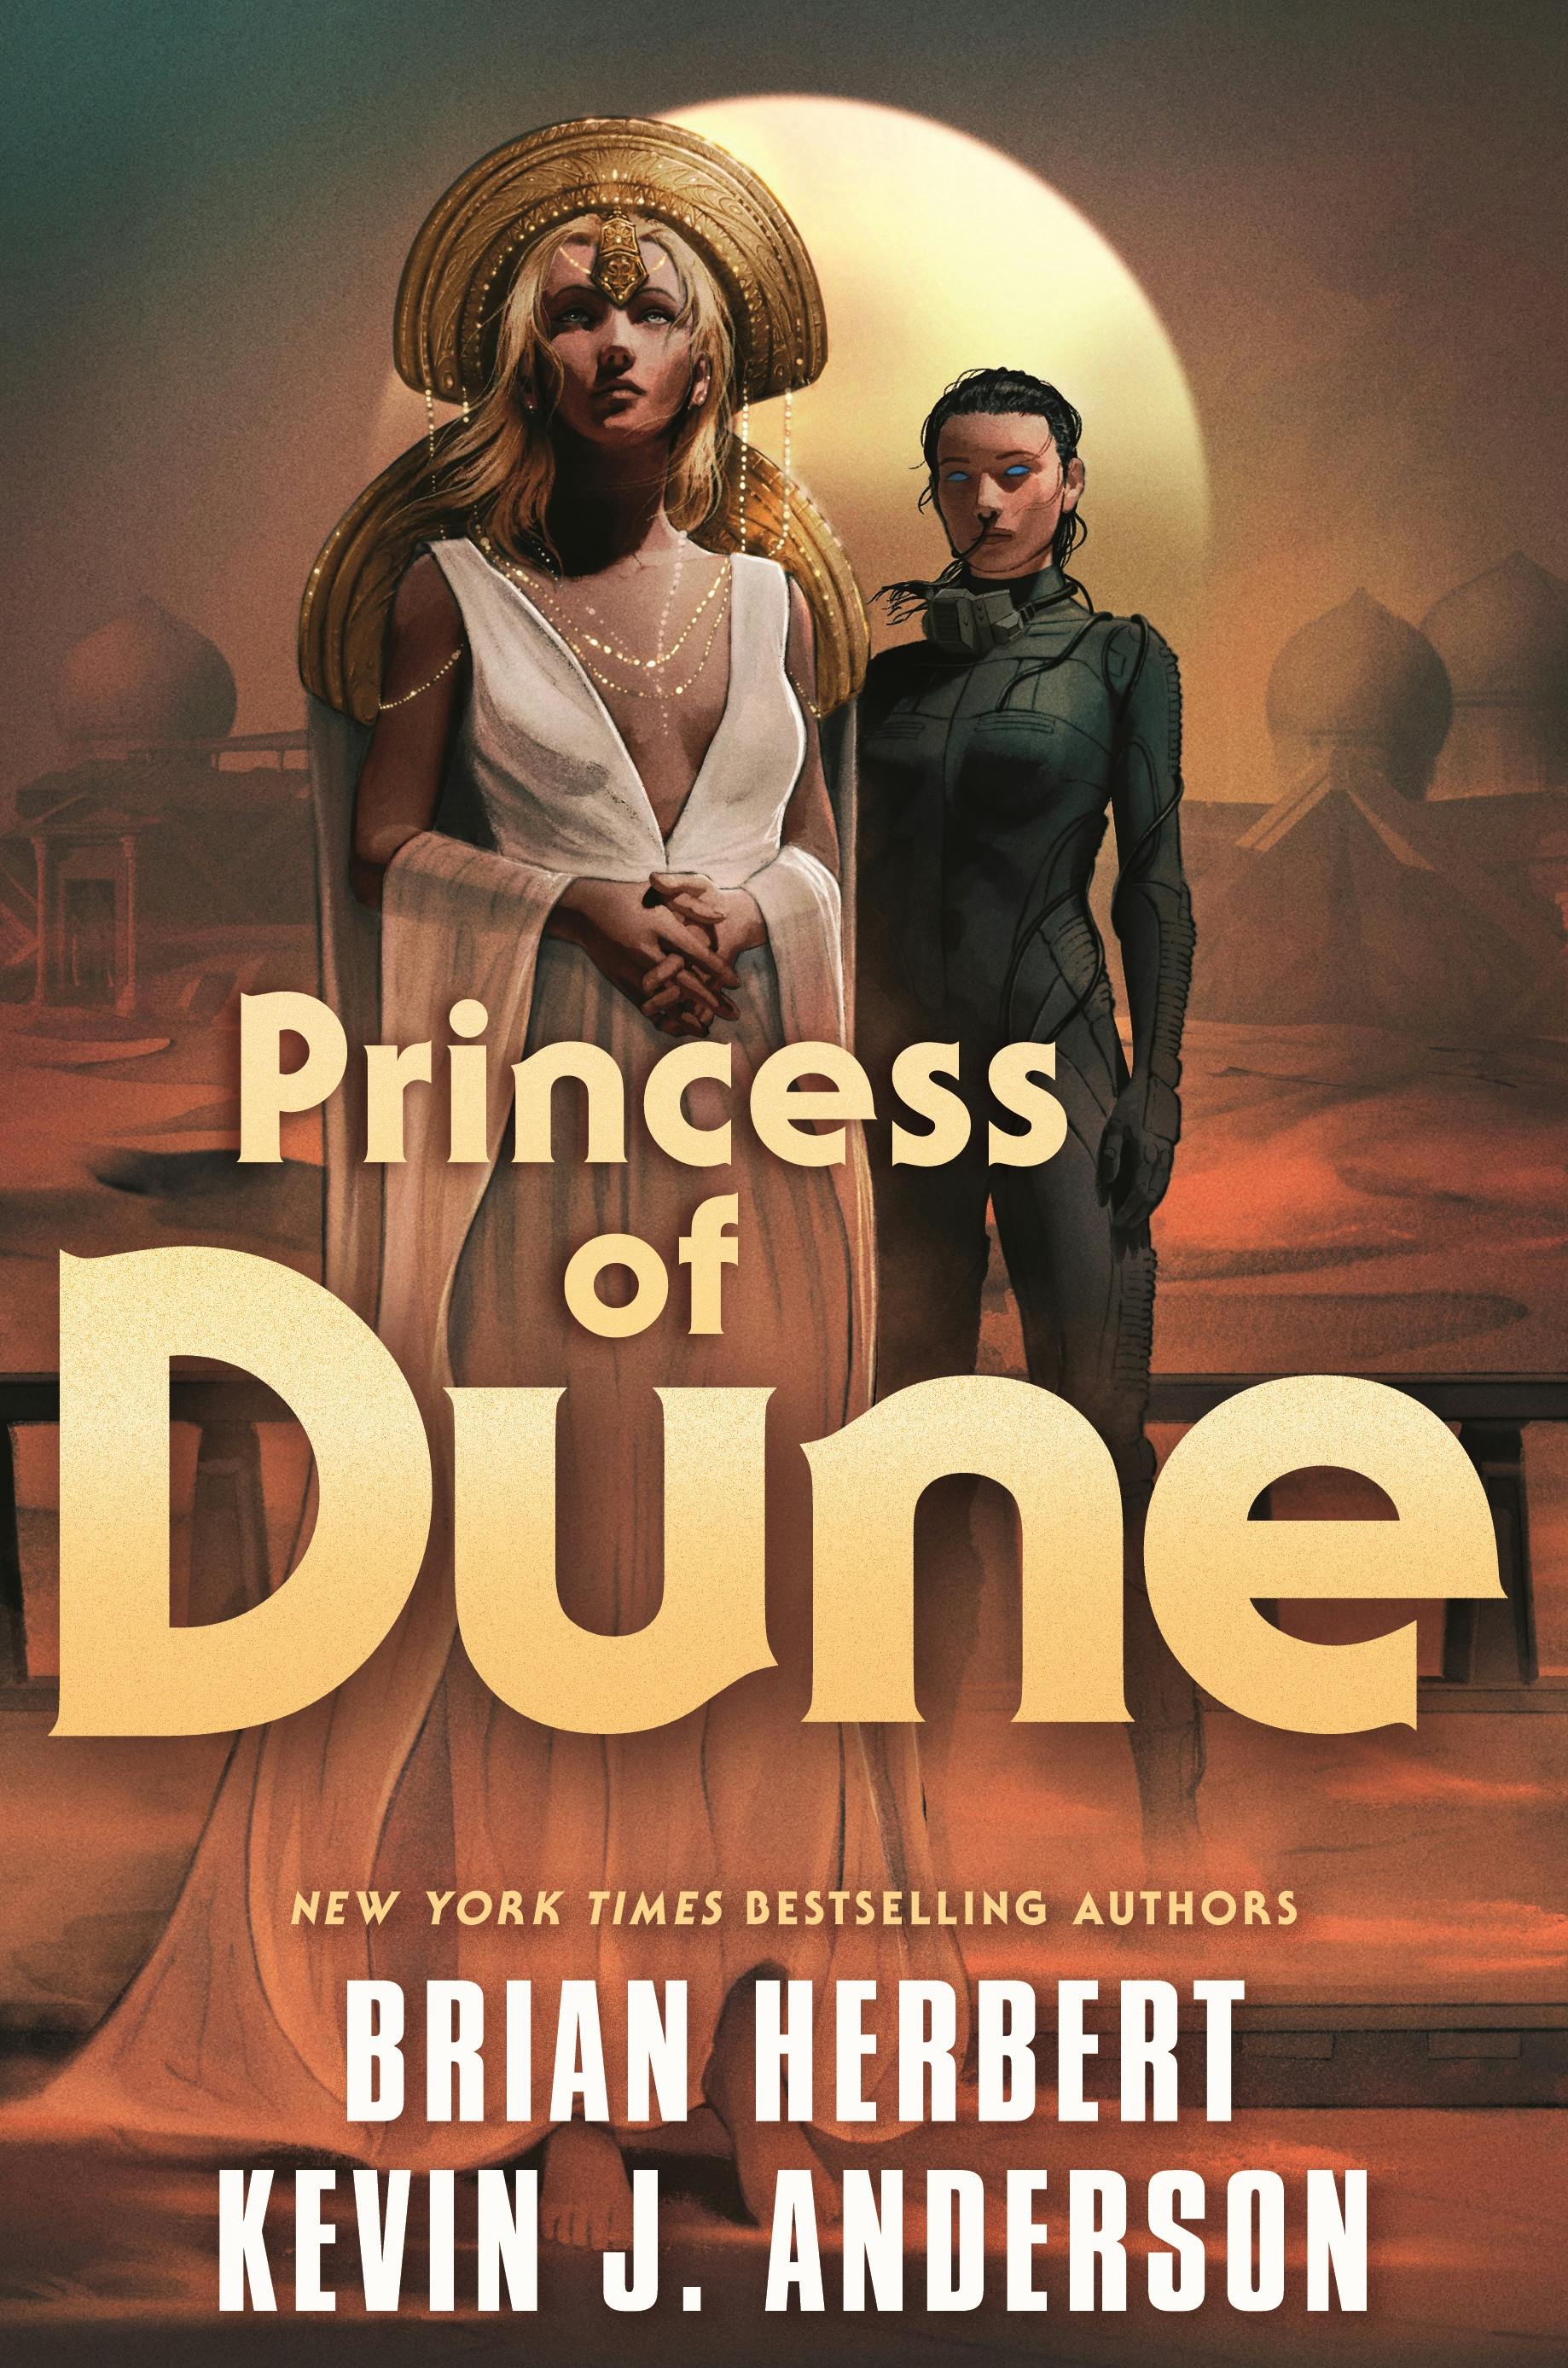 Cover for the book titled as: Princess of Dune